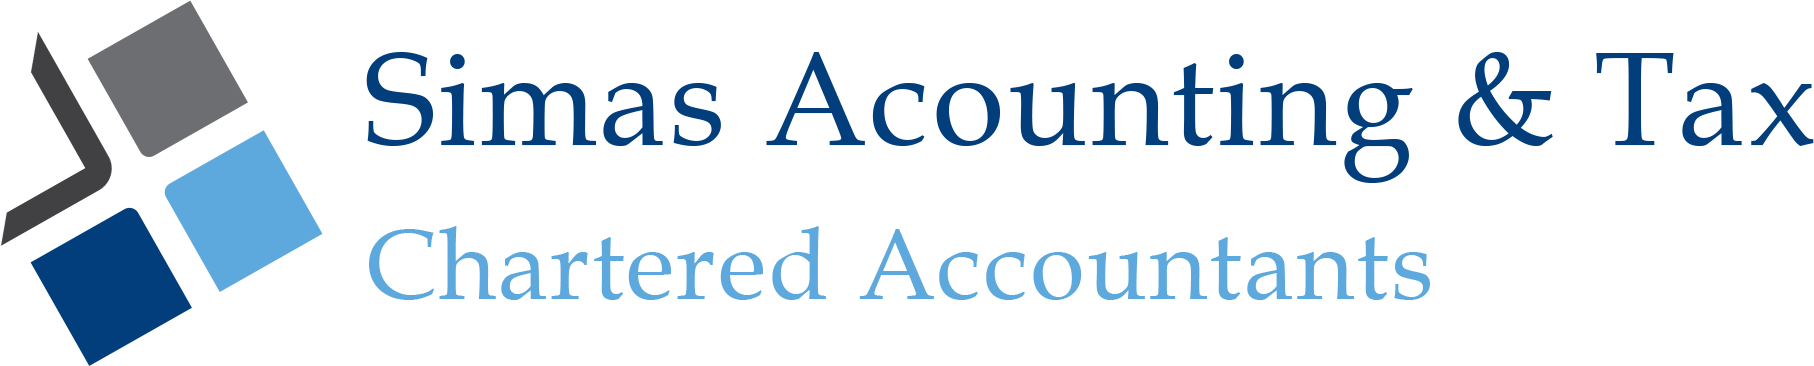 Simas Accounting & Tax | Accountants and Tax Advice for Bedford